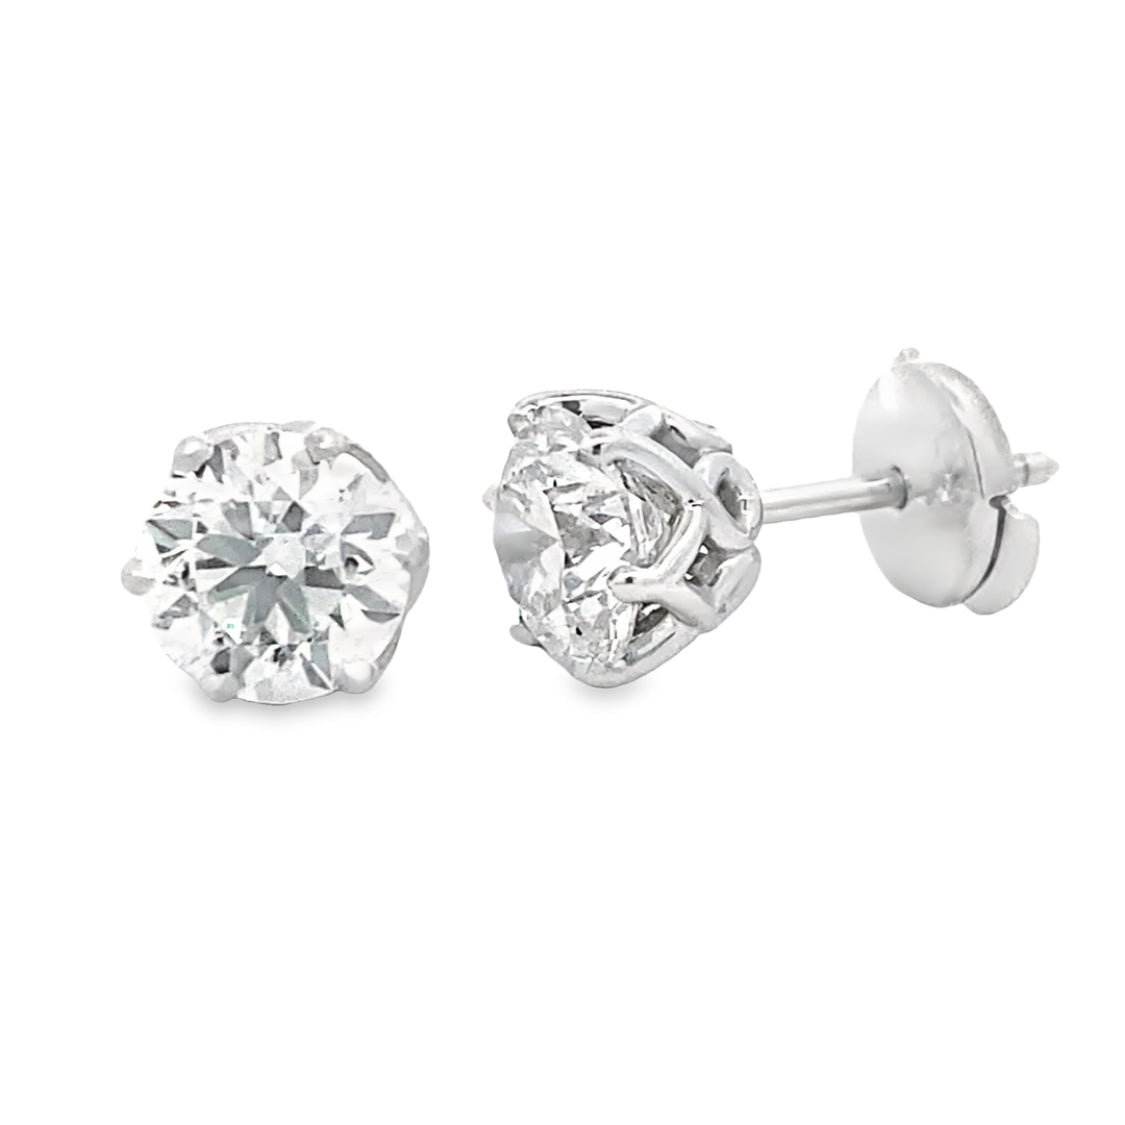 Beeghly & Co. "Best Collection"18 Karat 3CTW Diamond Stud Earrings